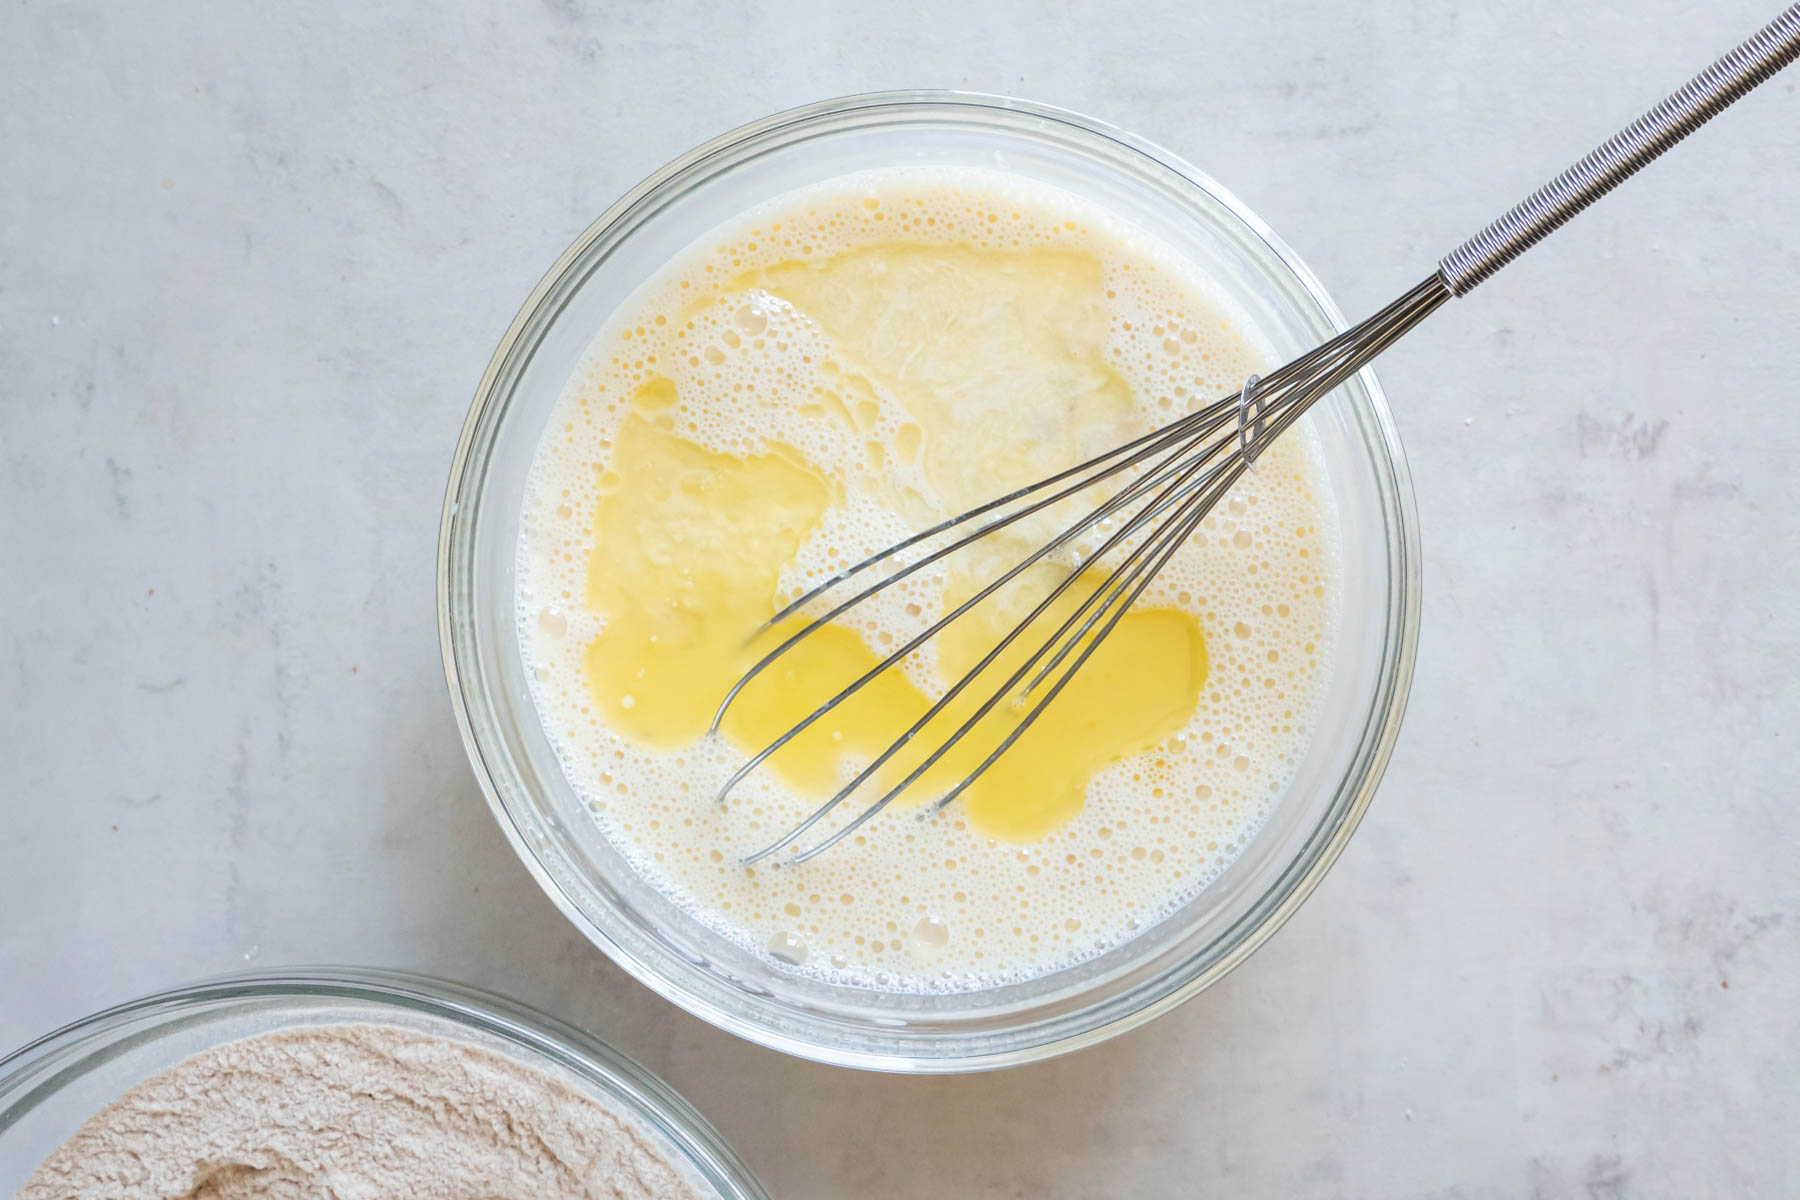 Melted butter added to wet ingredients in mixing bowl.